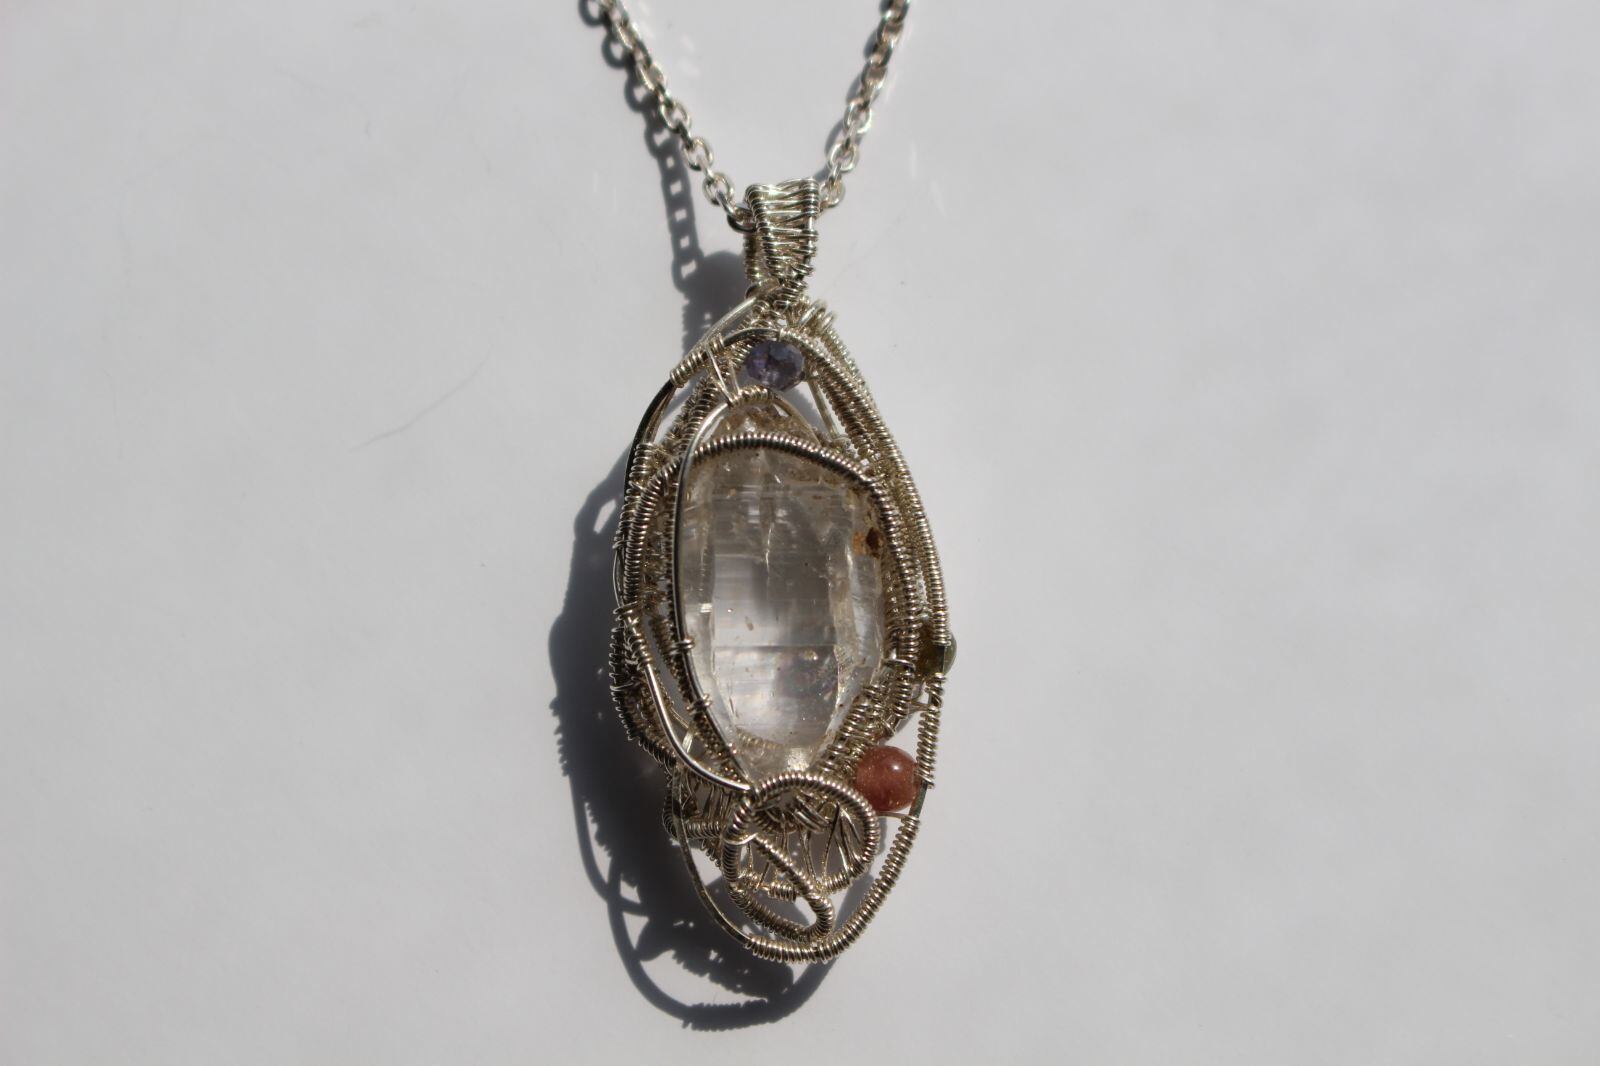 Crystal silver925 wirewrapping pendant